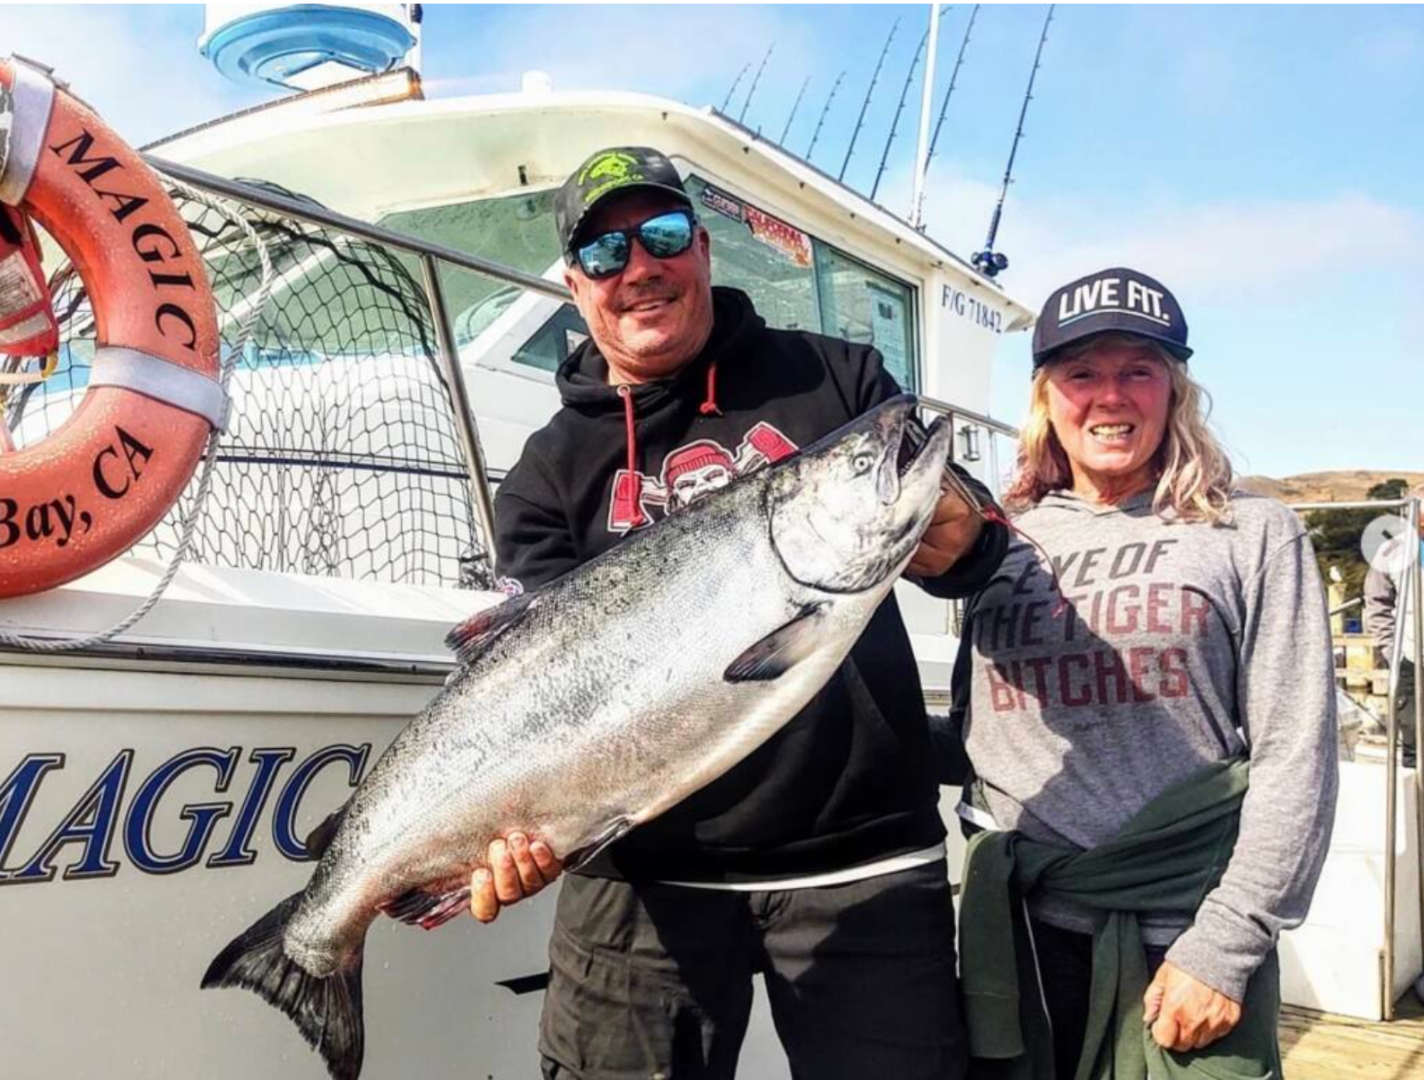 Bodega Bay sportfishing captains up in arms about proposed emission rules